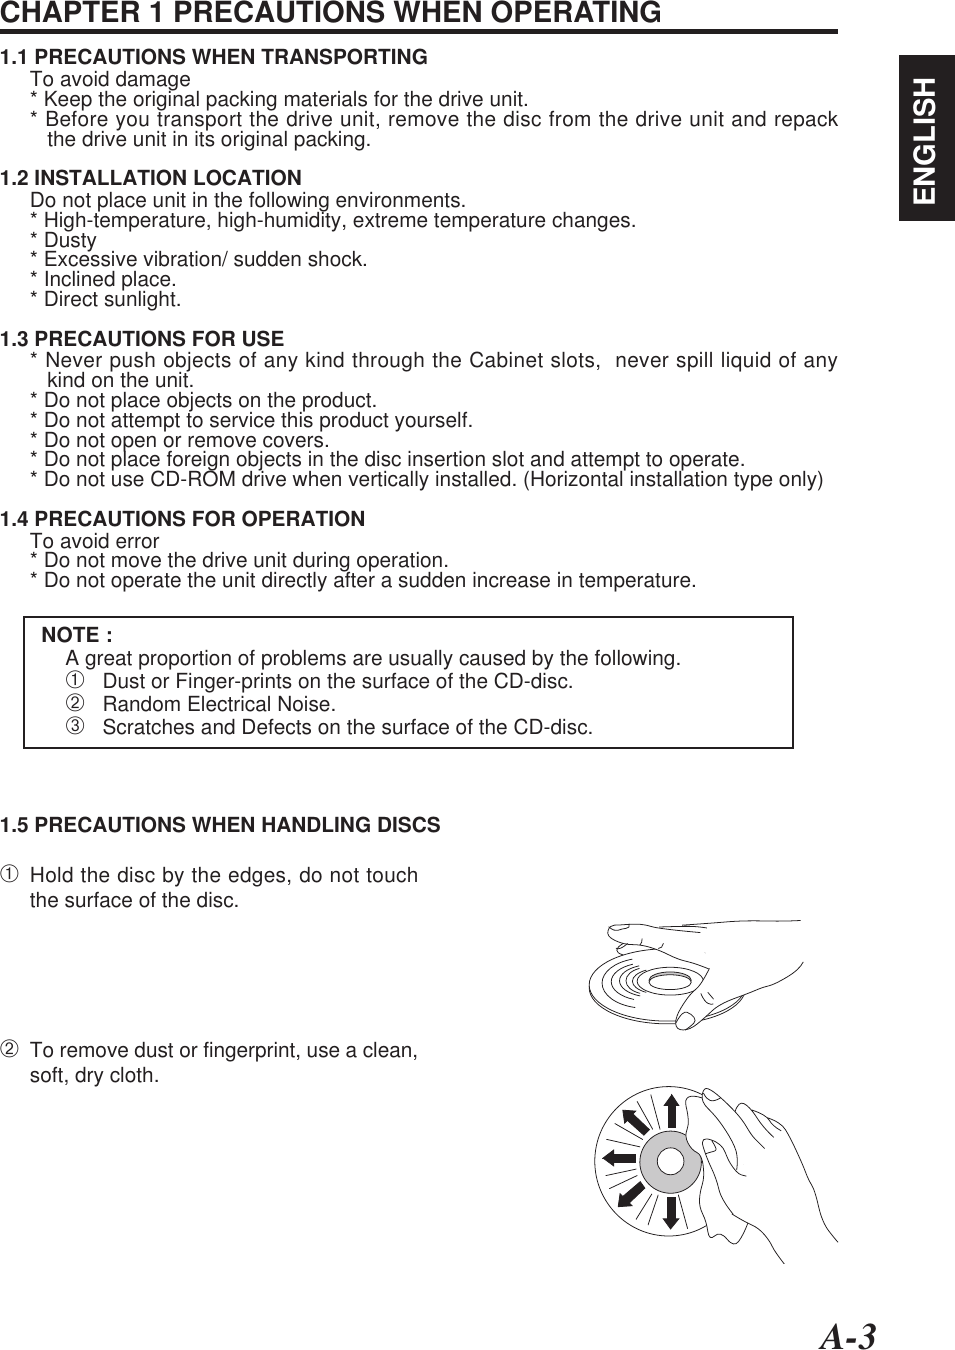 A-3ENGLISHCHAPTER 1 PRECAUTIONS WHEN OPERATING1.1 PRECAUTIONS WHEN TRANSPORTINGTo avoid damage* Keep the original packing materials for the drive unit.* Before you transport the drive unit, remove the disc from the drive unit and repack   the drive unit in its original packing.1.2 INSTALLATION LOCATIONDo not place unit in the following environments.* High-temperature, high-humidity, extreme temperature changes.* Dusty* Excessive vibration/ sudden shock.* Inclined place.* Direct sunlight.1.3 PRECAUTIONS FOR USE* Never push objects of any kind through the Cabinet slots,  never spill liquid of any   kind on the unit.* Do not place objects on the product.* Do not attempt to service this product yourself.* Do not open or remove covers.* Do not place foreign objects in the disc insertion slot and attempt to operate.* Do not use CD-ROM drive when vertically installed. (Horizontal installation type only)1.4 PRECAUTIONS FOR OPERATIONTo avoid error* Do not move the drive unit during operation.* Do not operate the unit directly after a sudden increase in temperature.NOTE :A great proportion of problems are usually caused by the following.➀   Dust or Finger-prints on the surface of the CD-disc.➁   Random Electrical Noise.➂   Scratches and Defects on the surface of the CD-disc.1.5 PRECAUTIONS WHEN HANDLING DISCS➀Hold the disc by the edges, do not touchthe surface of the disc.➁To remove dust or fingerprint, use a clean,soft, dry cloth.